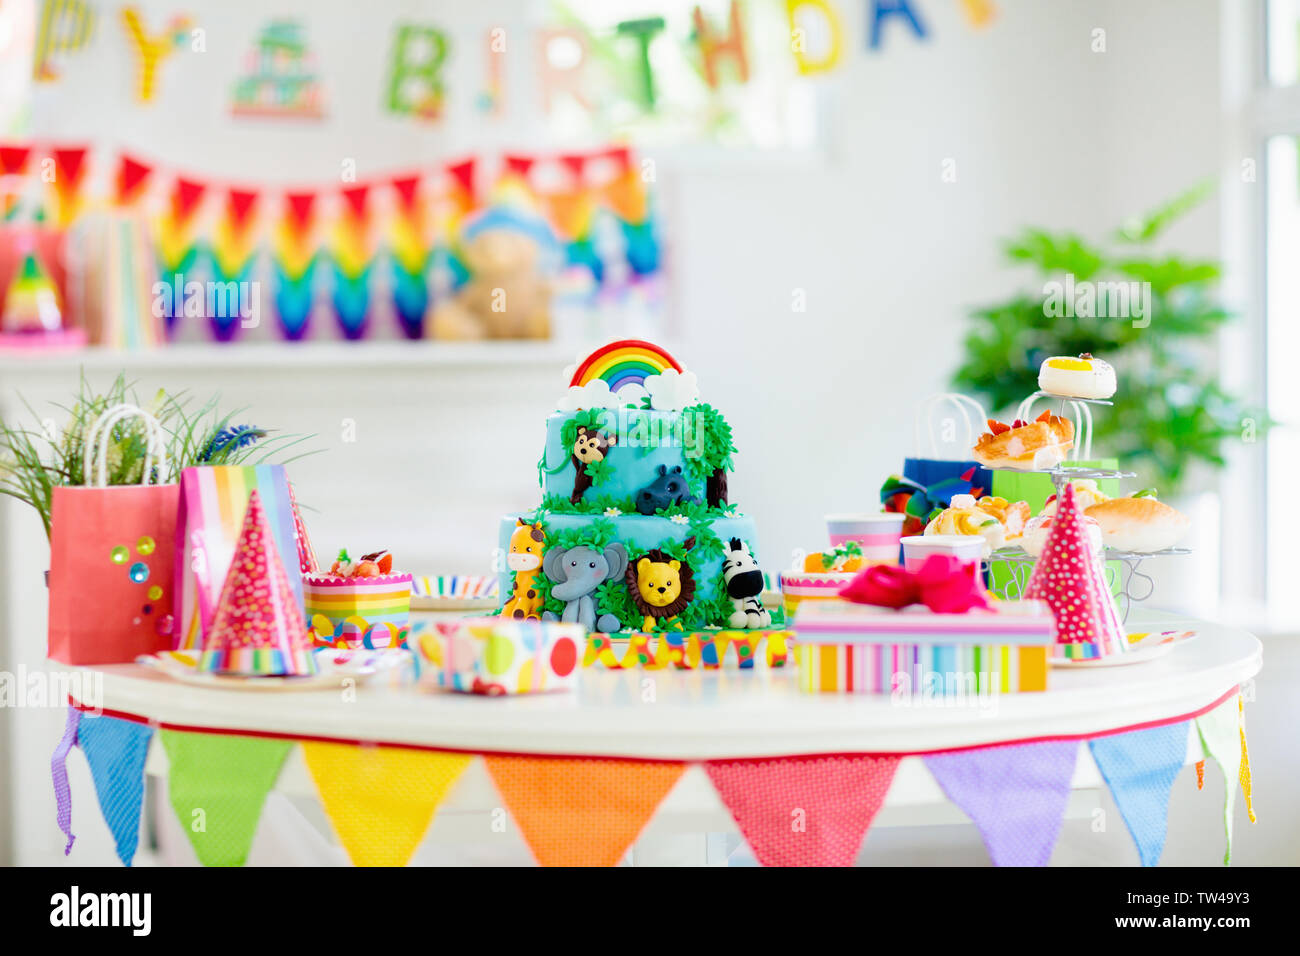 Cake for kids birthday celebration. Jungle animals theme children party. Decorated room for boy or girl kid birthday. Table setting with presents, gif Stock Photo